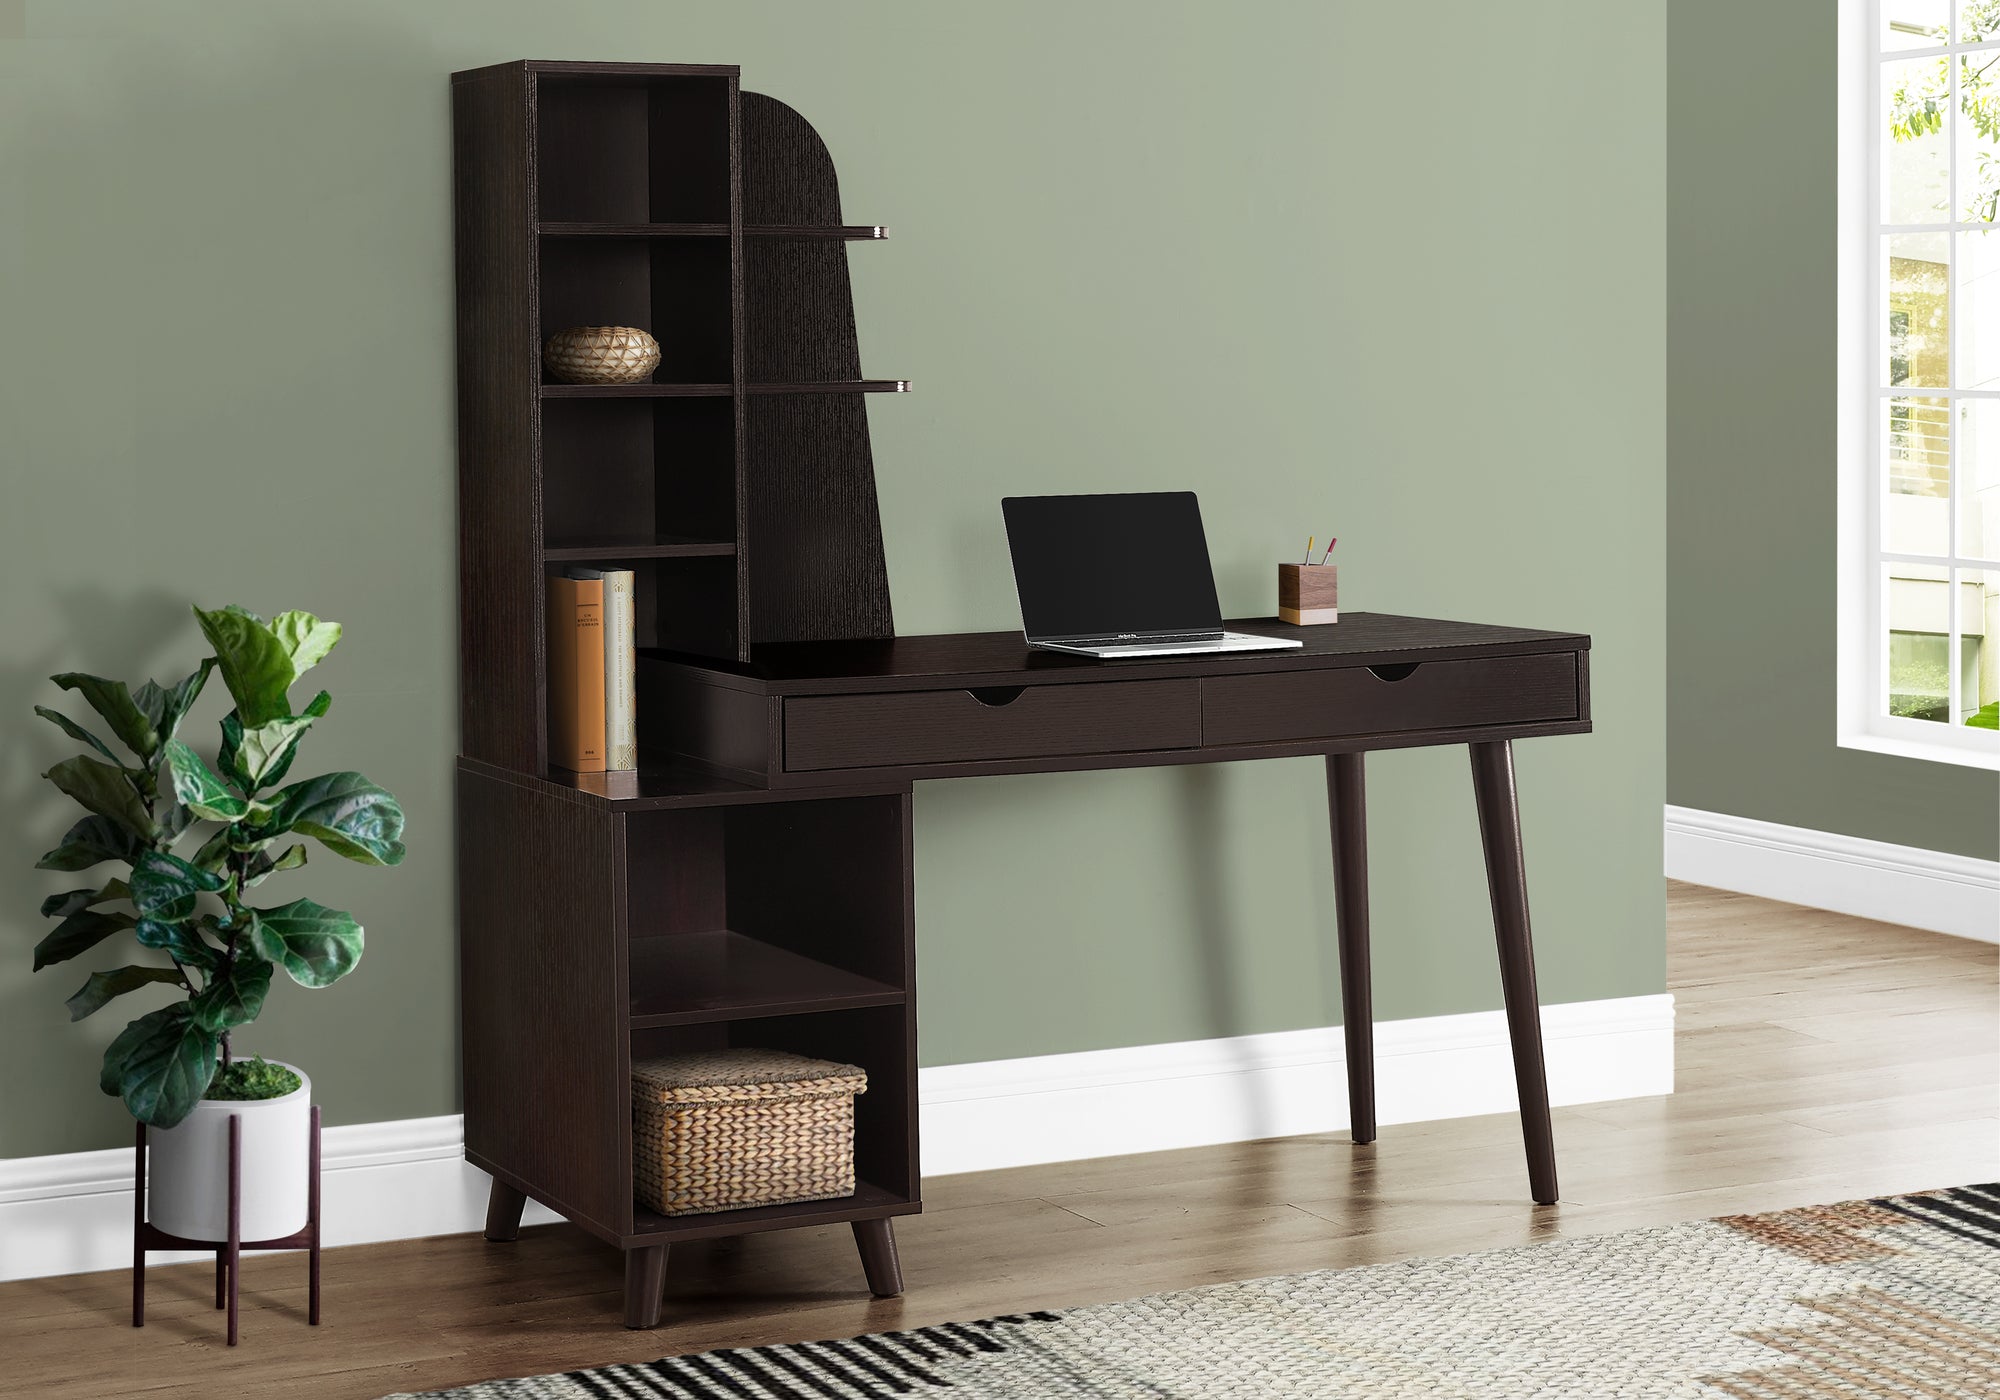 MN-987096    Computer Desk, Home Office, Laptop, Storage Drawers, 55"L, Laminate, Solid Wood Legs, Dark Brown, Contemporary, Modern